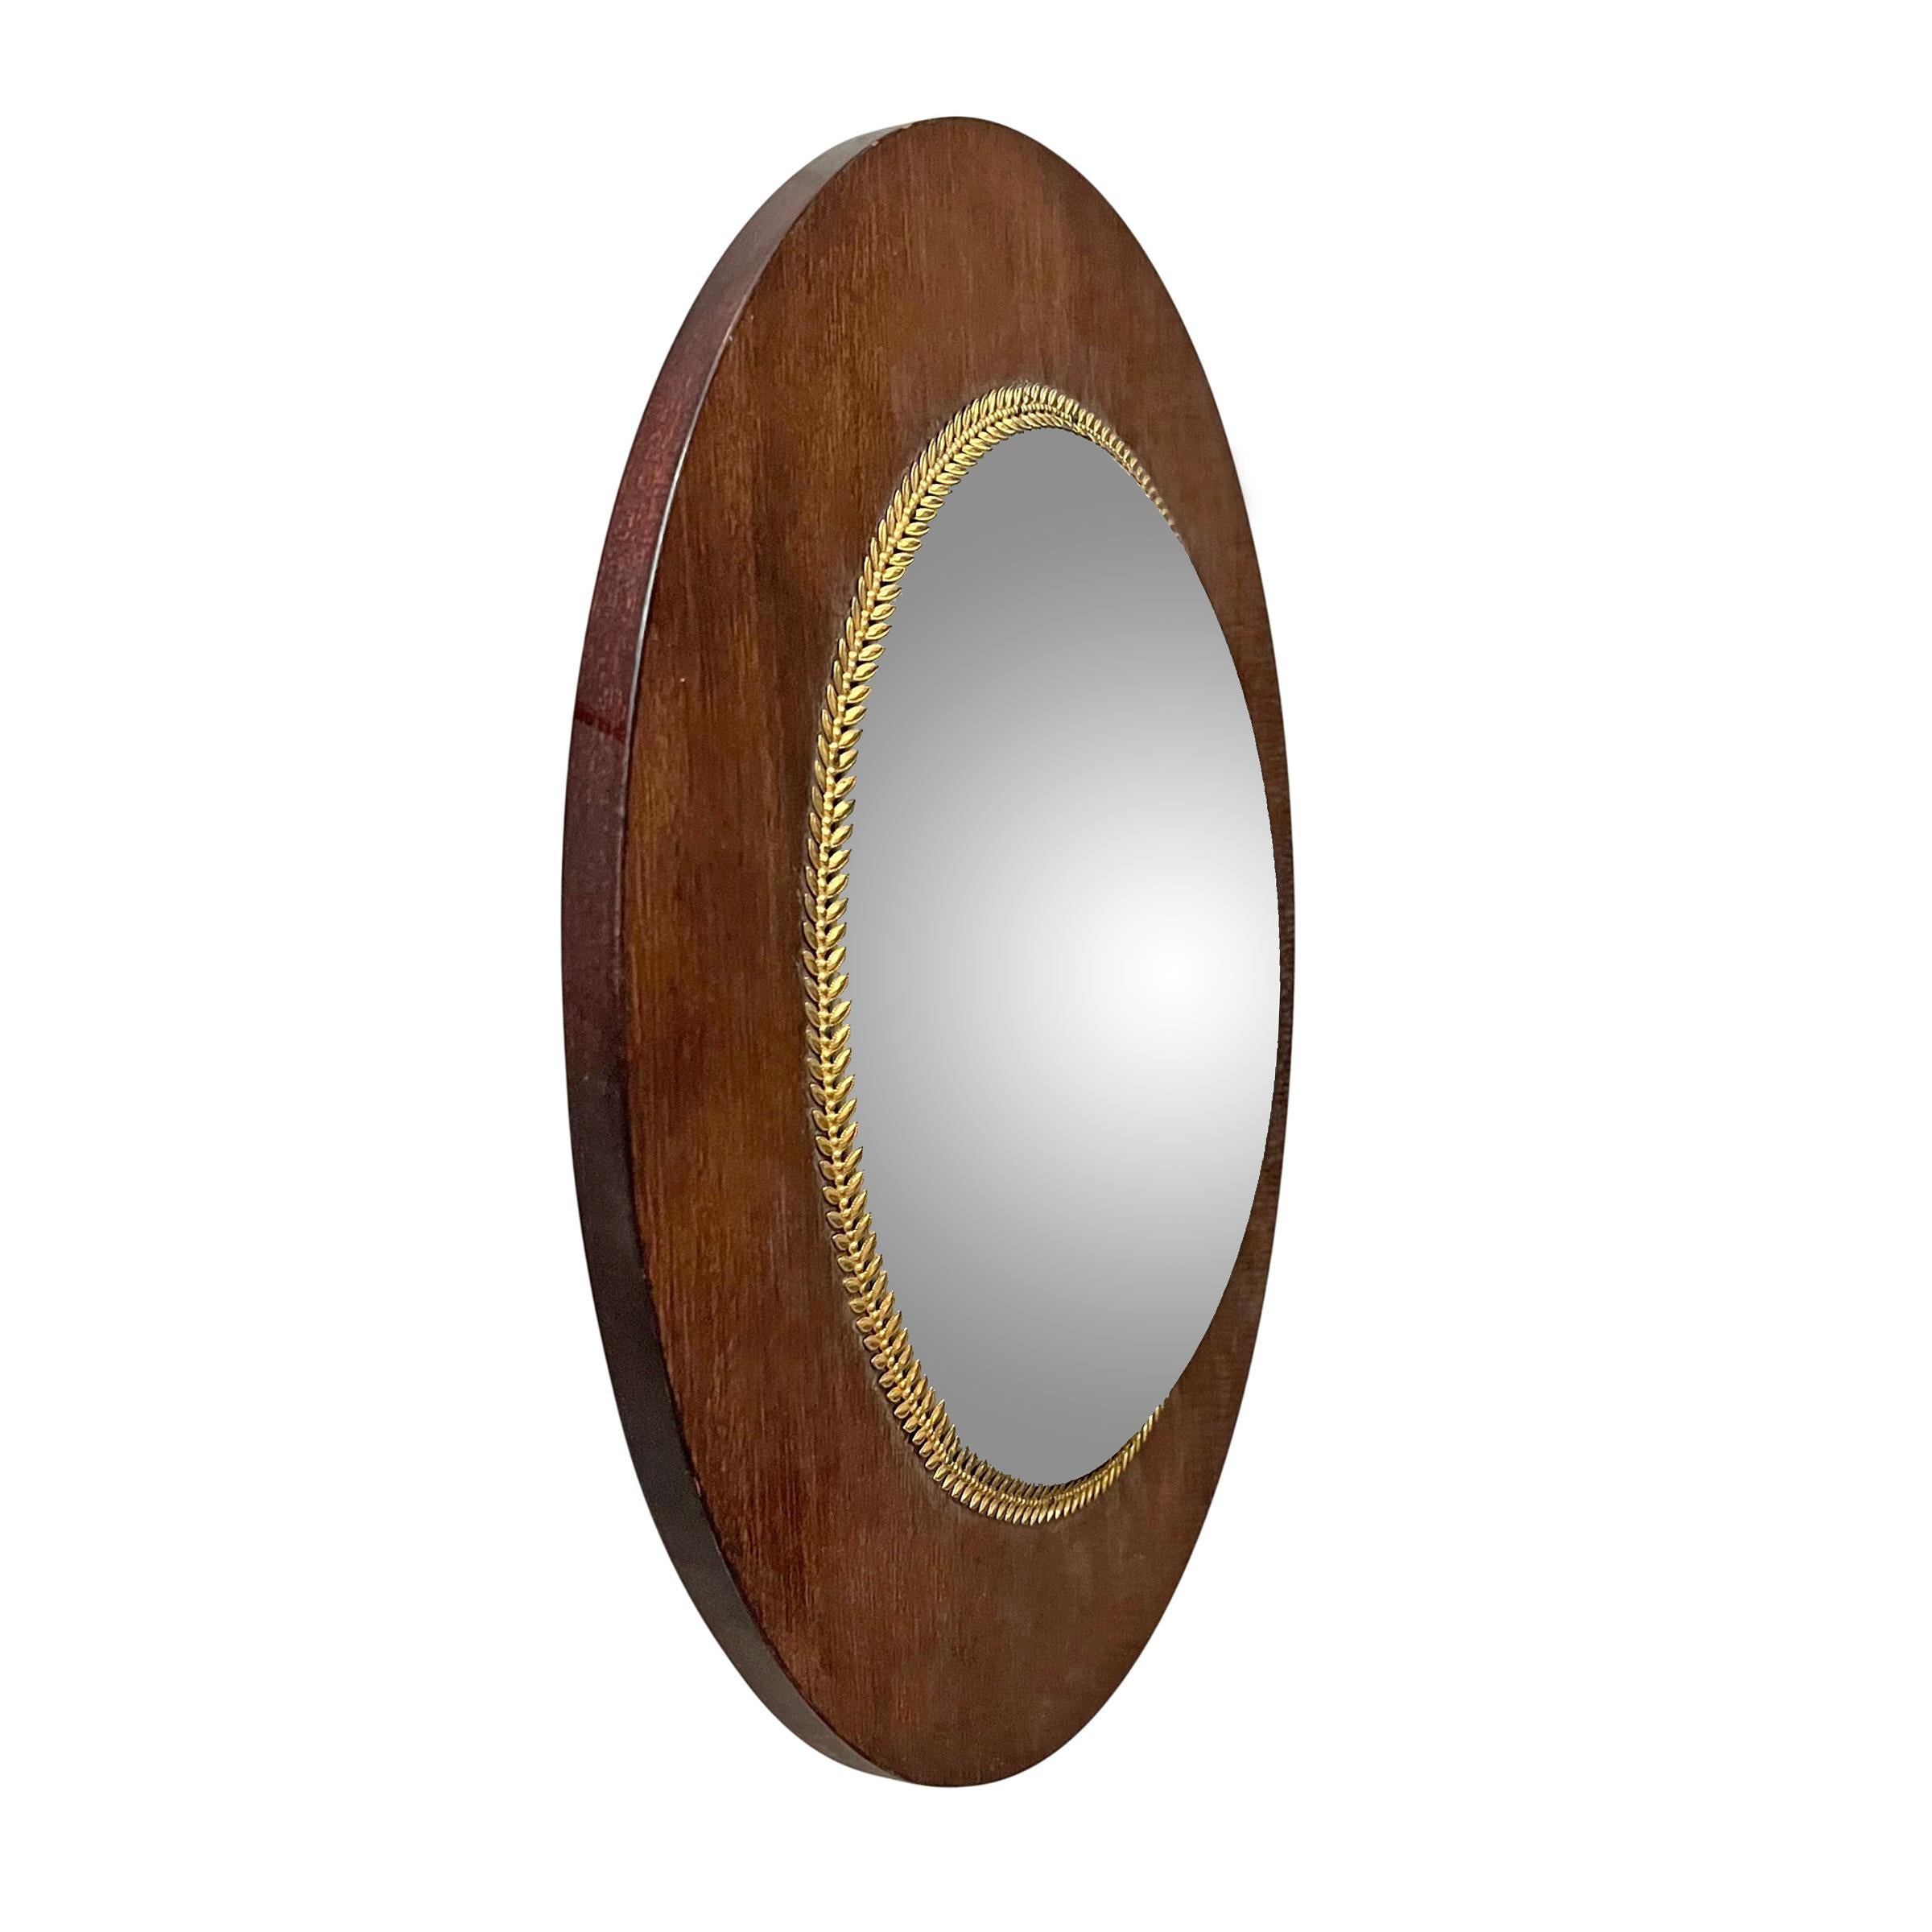 Early 19th Century French Empire Convex Mirror In Good Condition For Sale In Chicago, IL